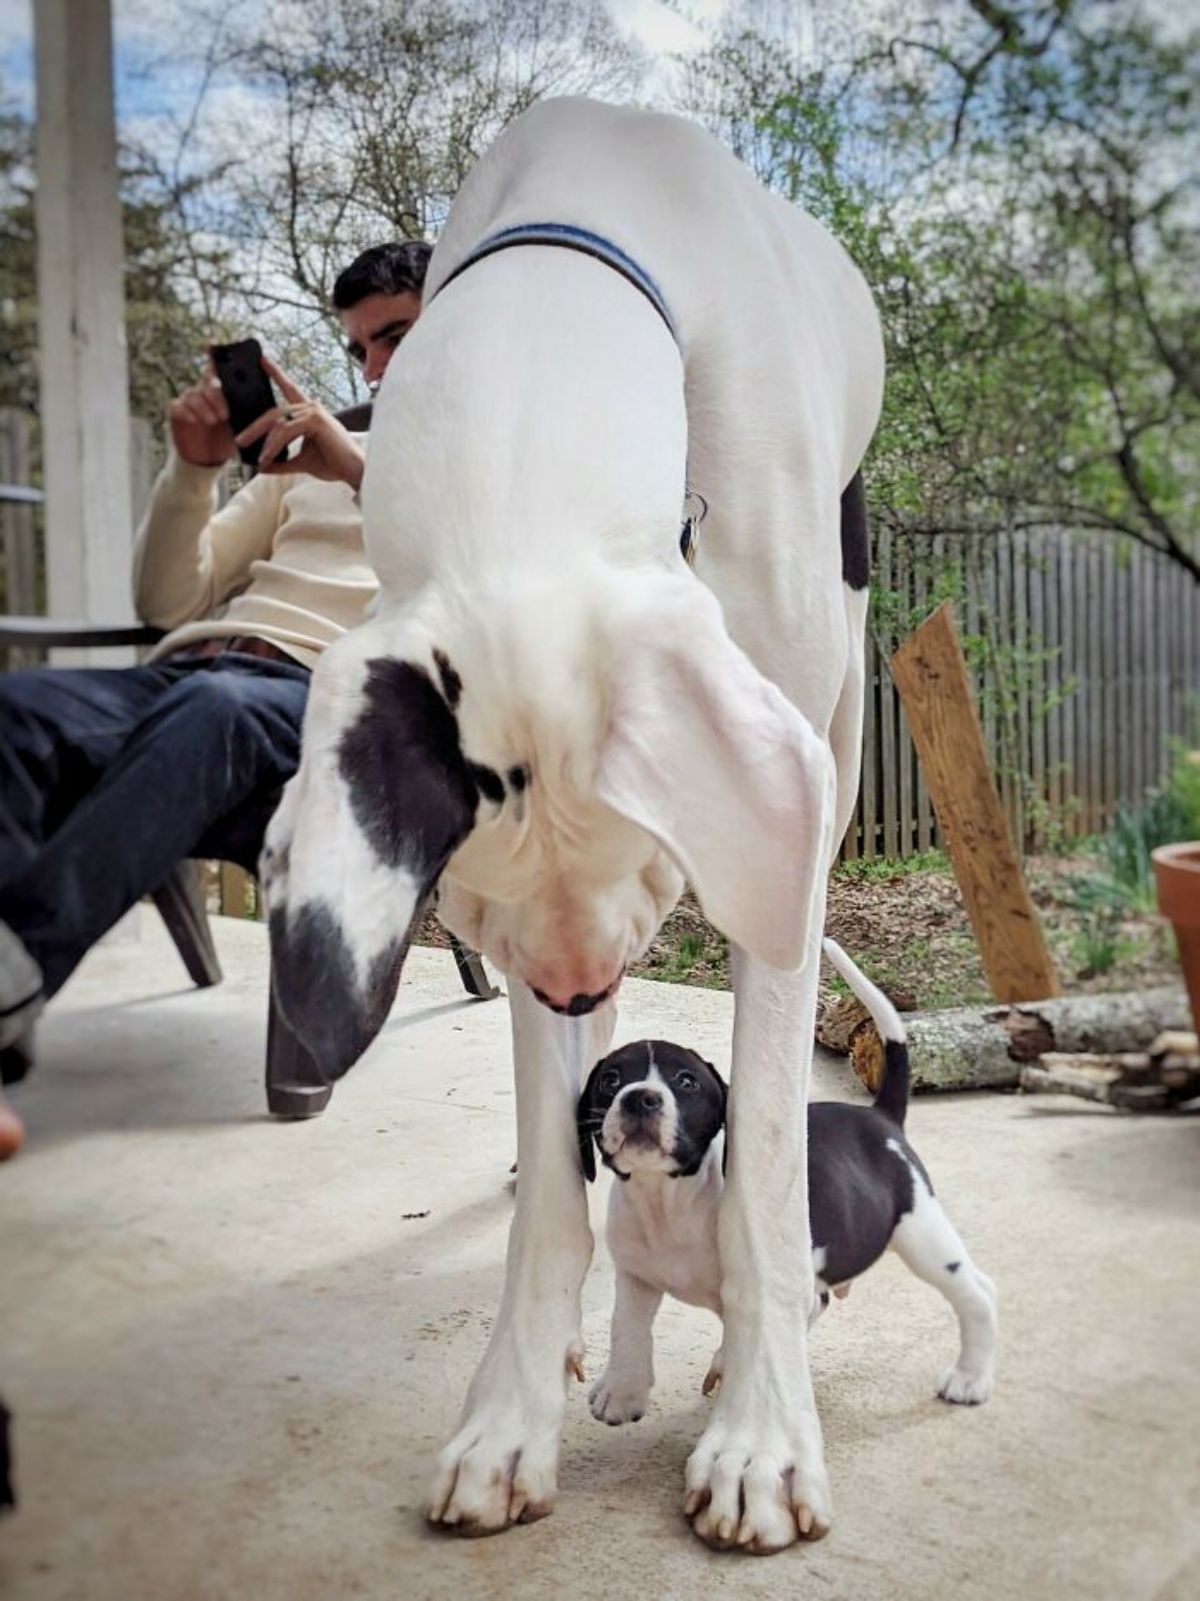 black and white great dane looking down at a tiny black and white puppy peeking up from under the large dog's front feet